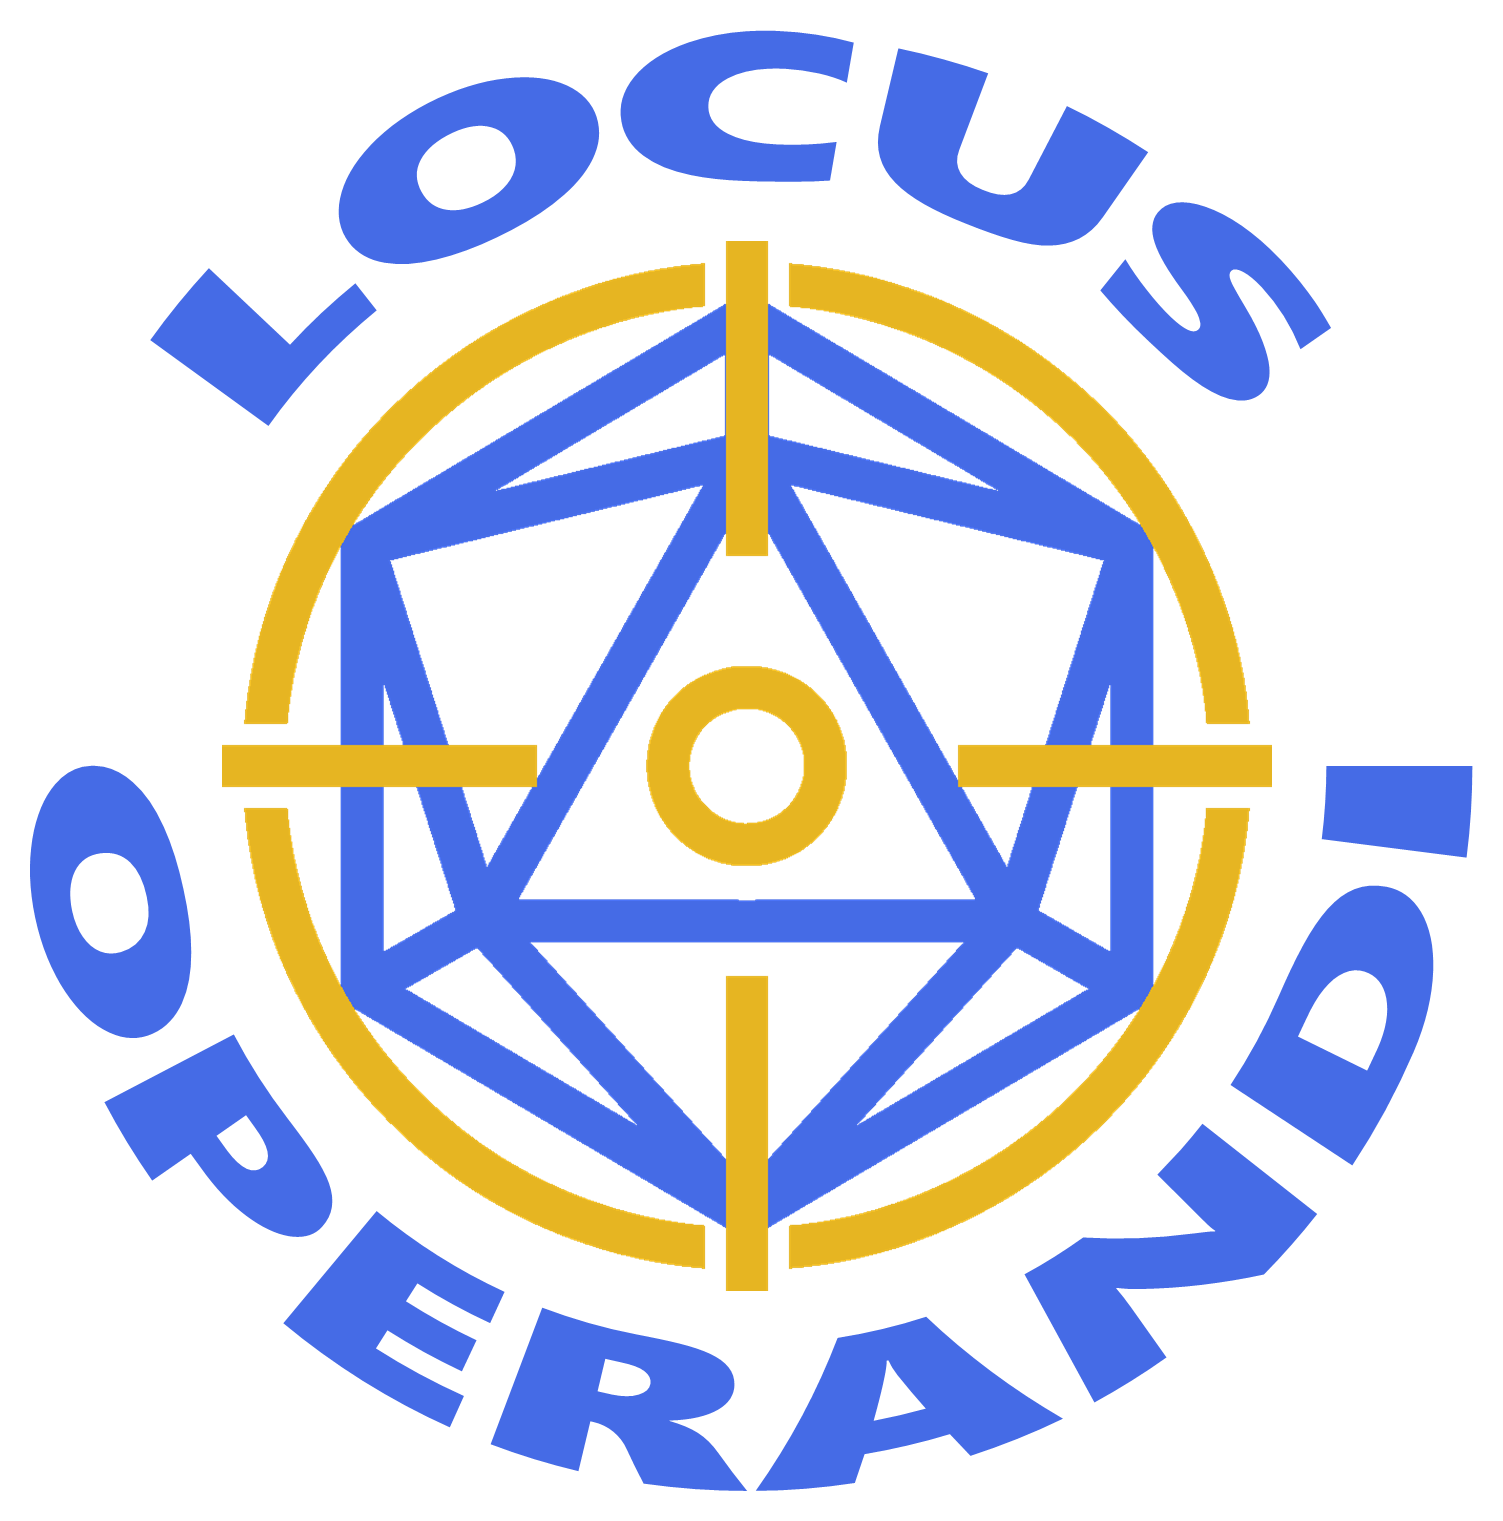 The official Locus Operandi tabletop logo.  It shows a reticle set on a D20 between the words Locus Operandi.